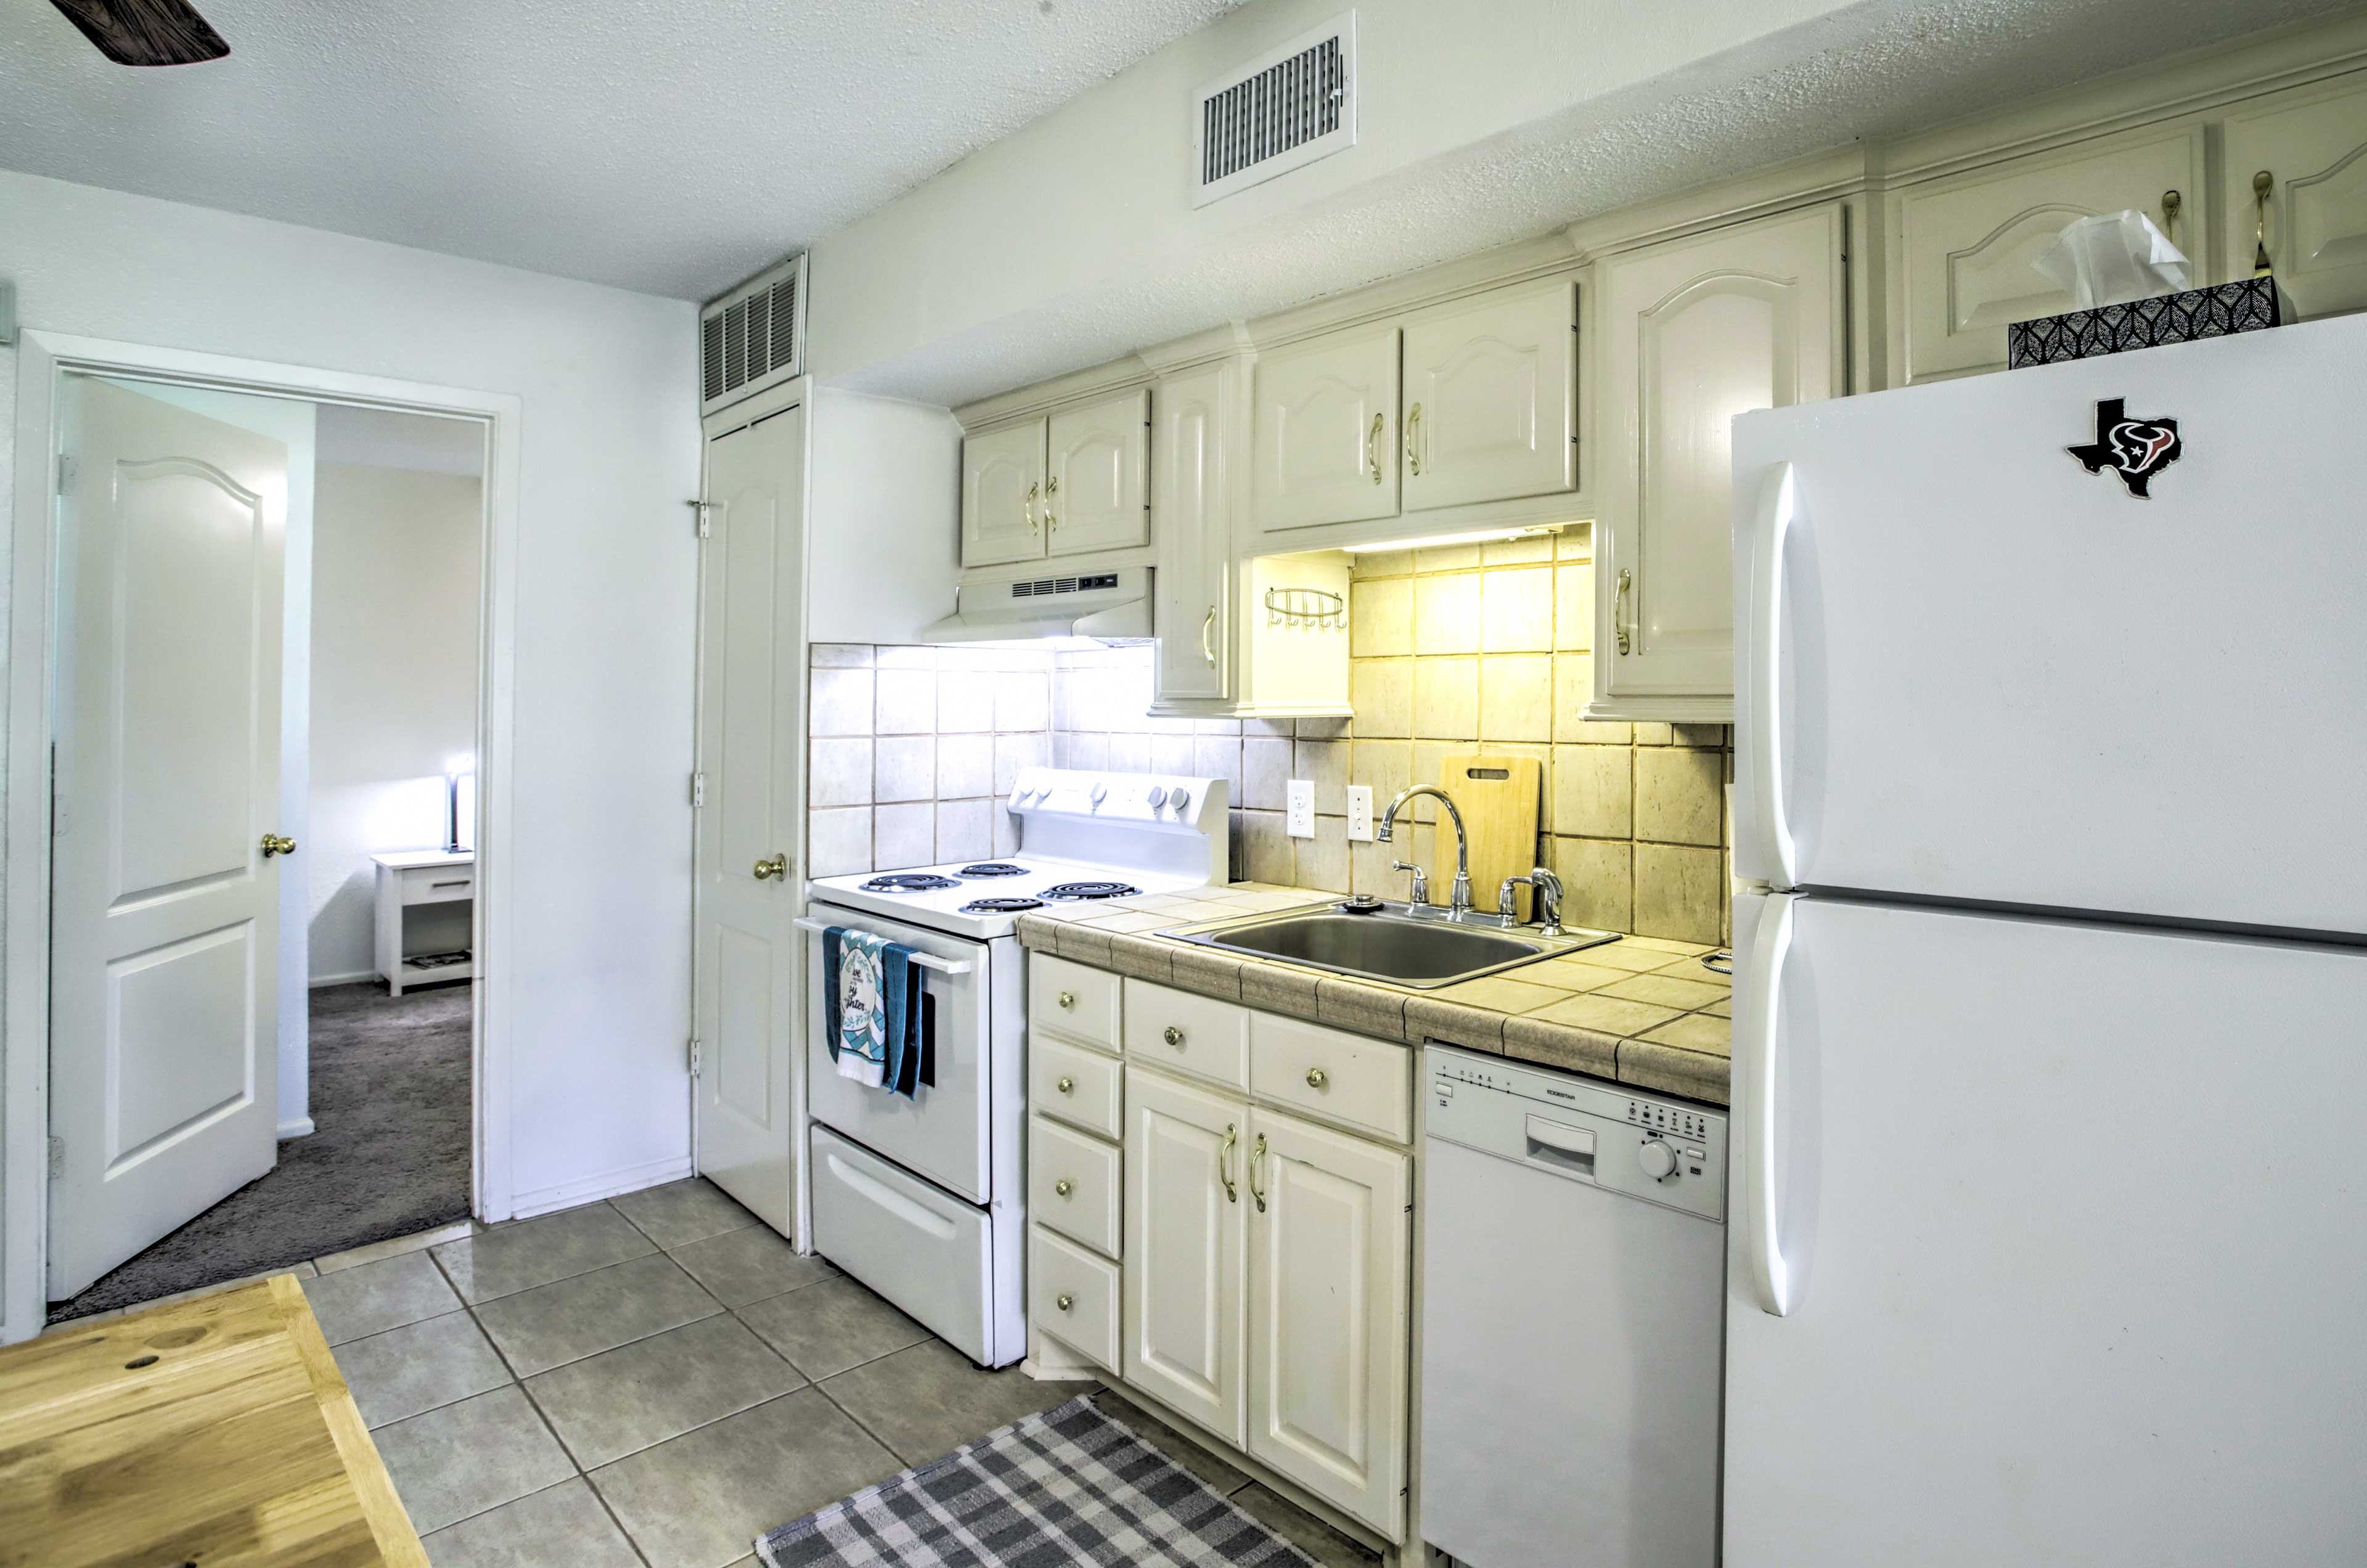 Kitchen | Fully Equipped | Cooking Basics | Dishware/Flatware | Coffee Maker